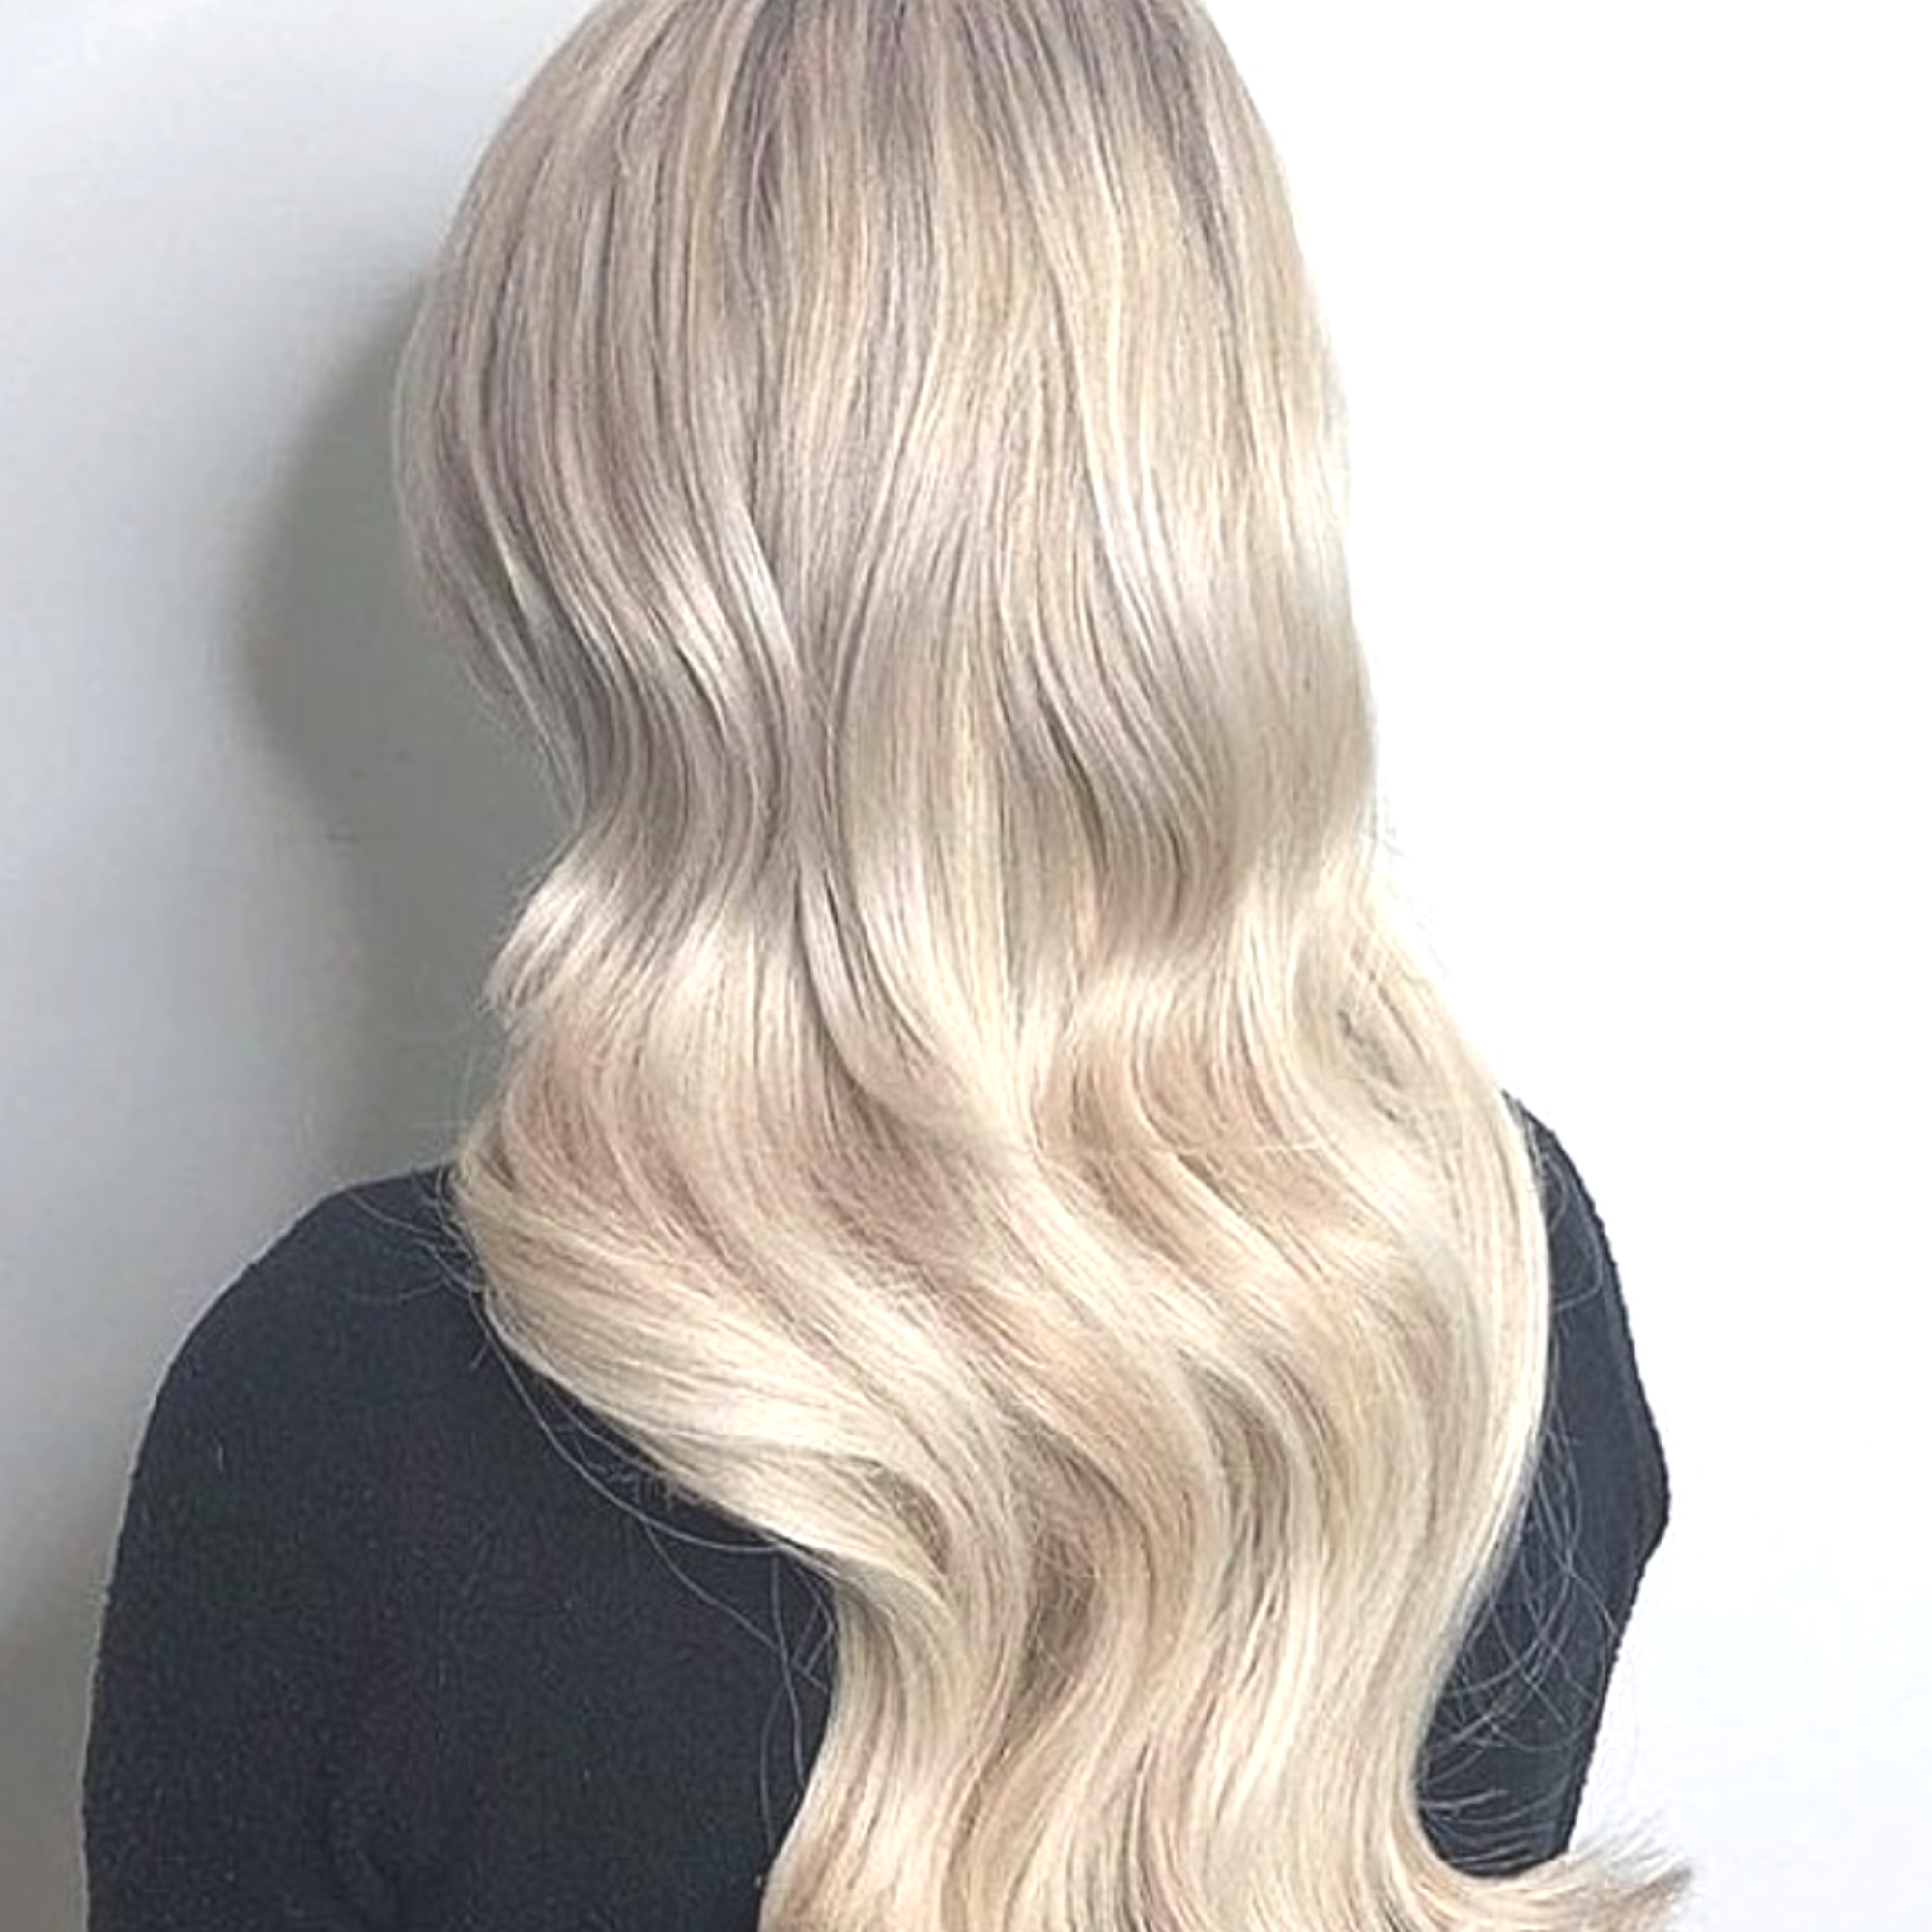 18" Invisible Tape Extensions Blonde AF